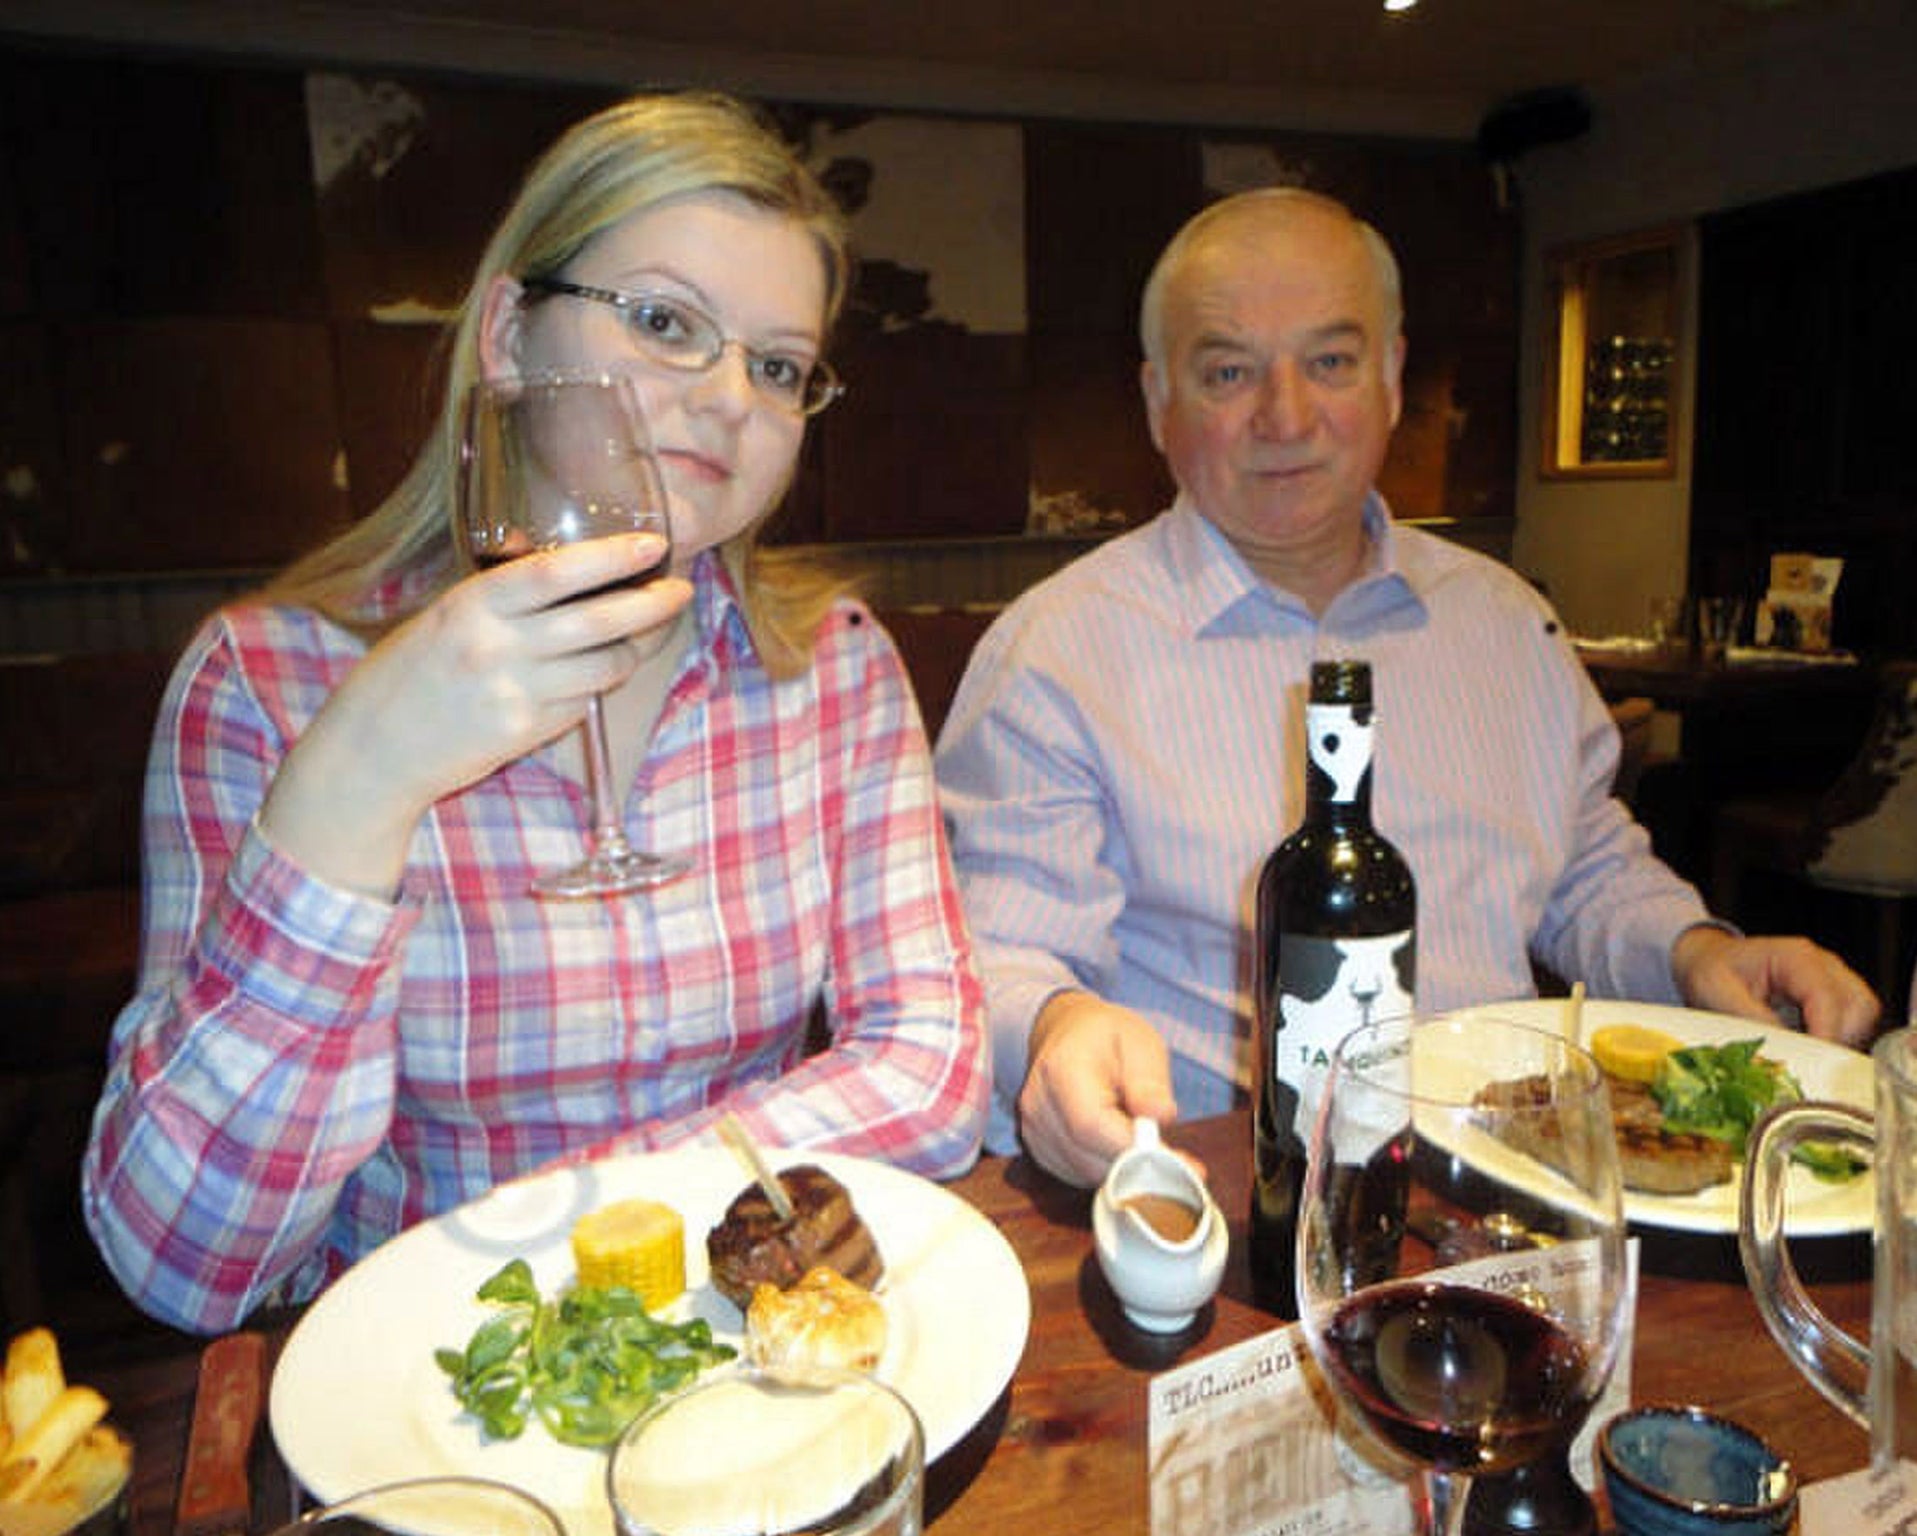 Sergei (right) and Yulia Skripal (left) were both poisoned on 4 March